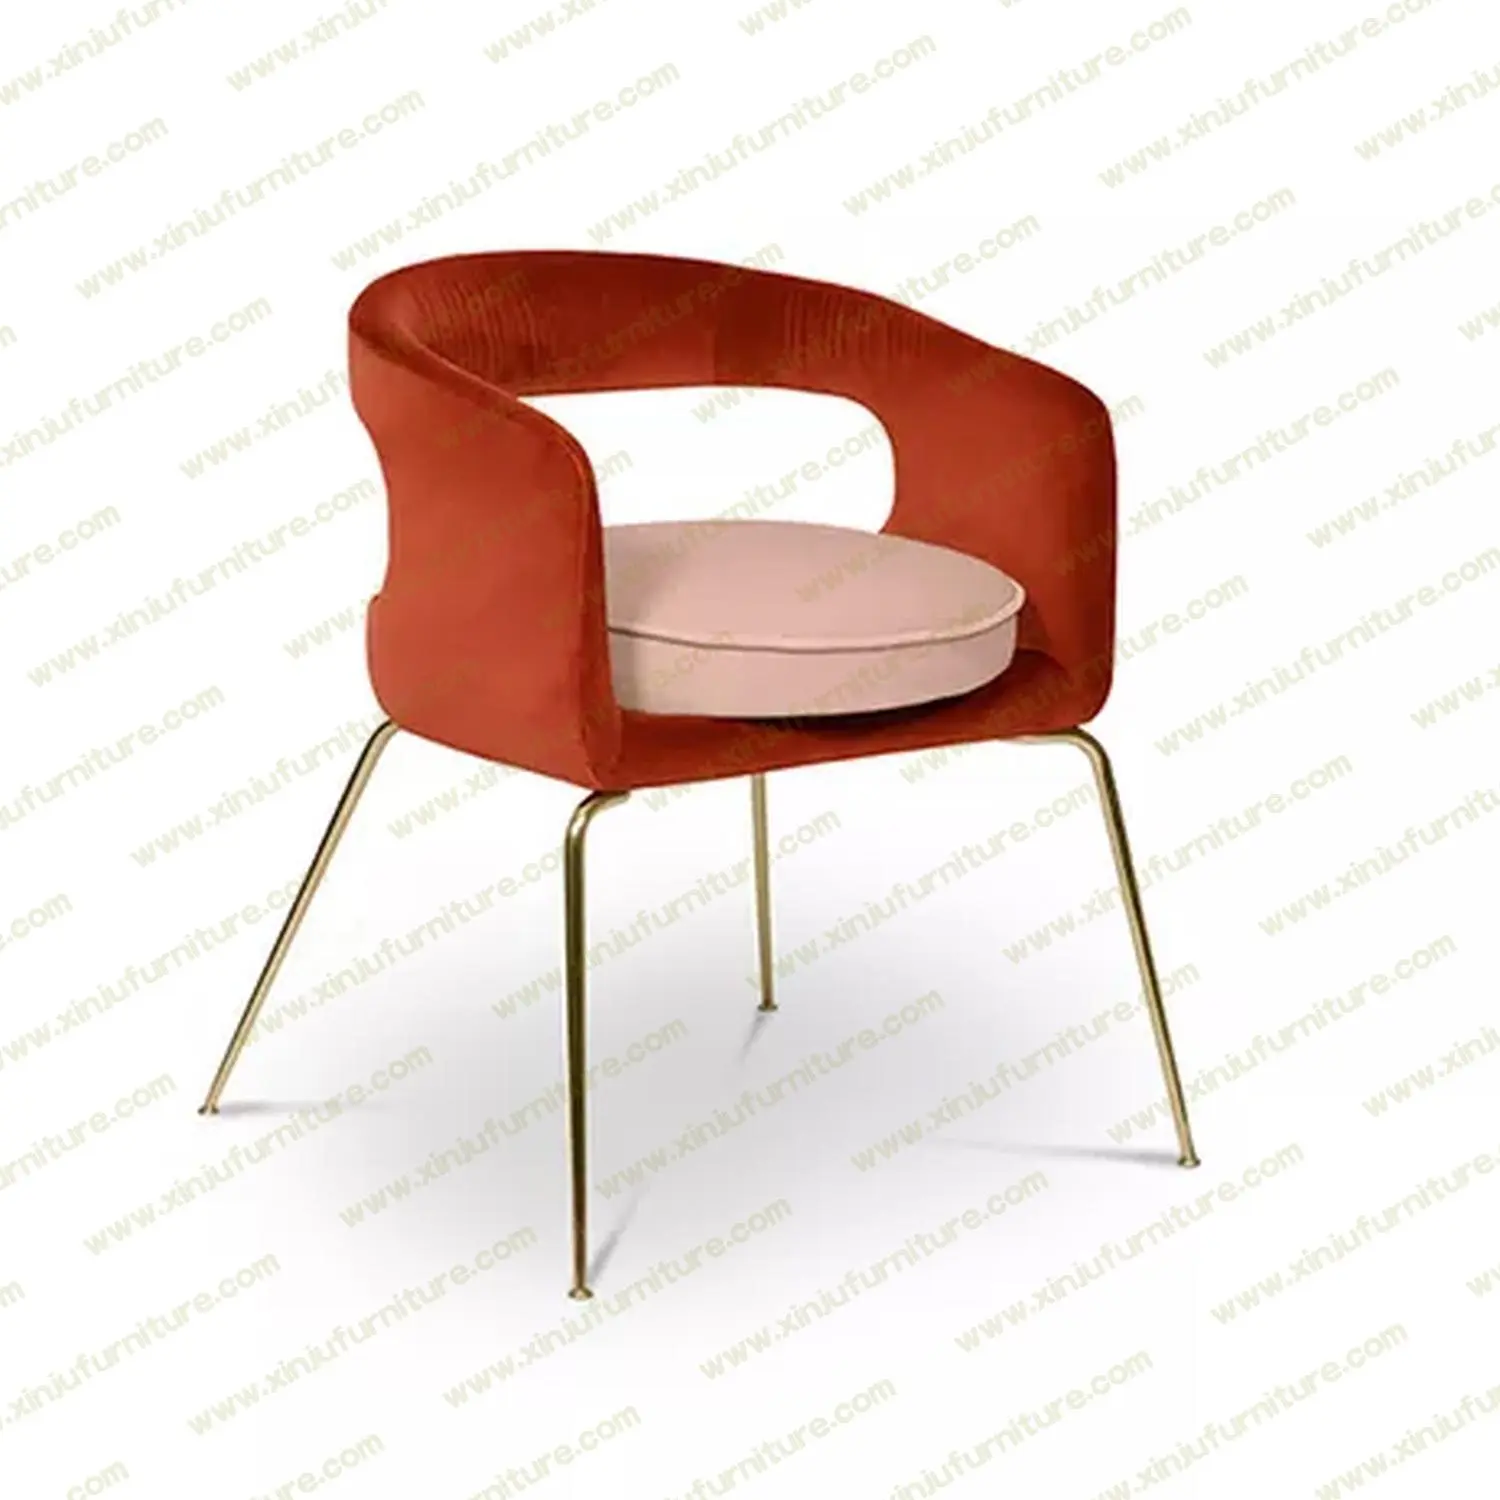 Hollow back design thickened dining chair for restaurant